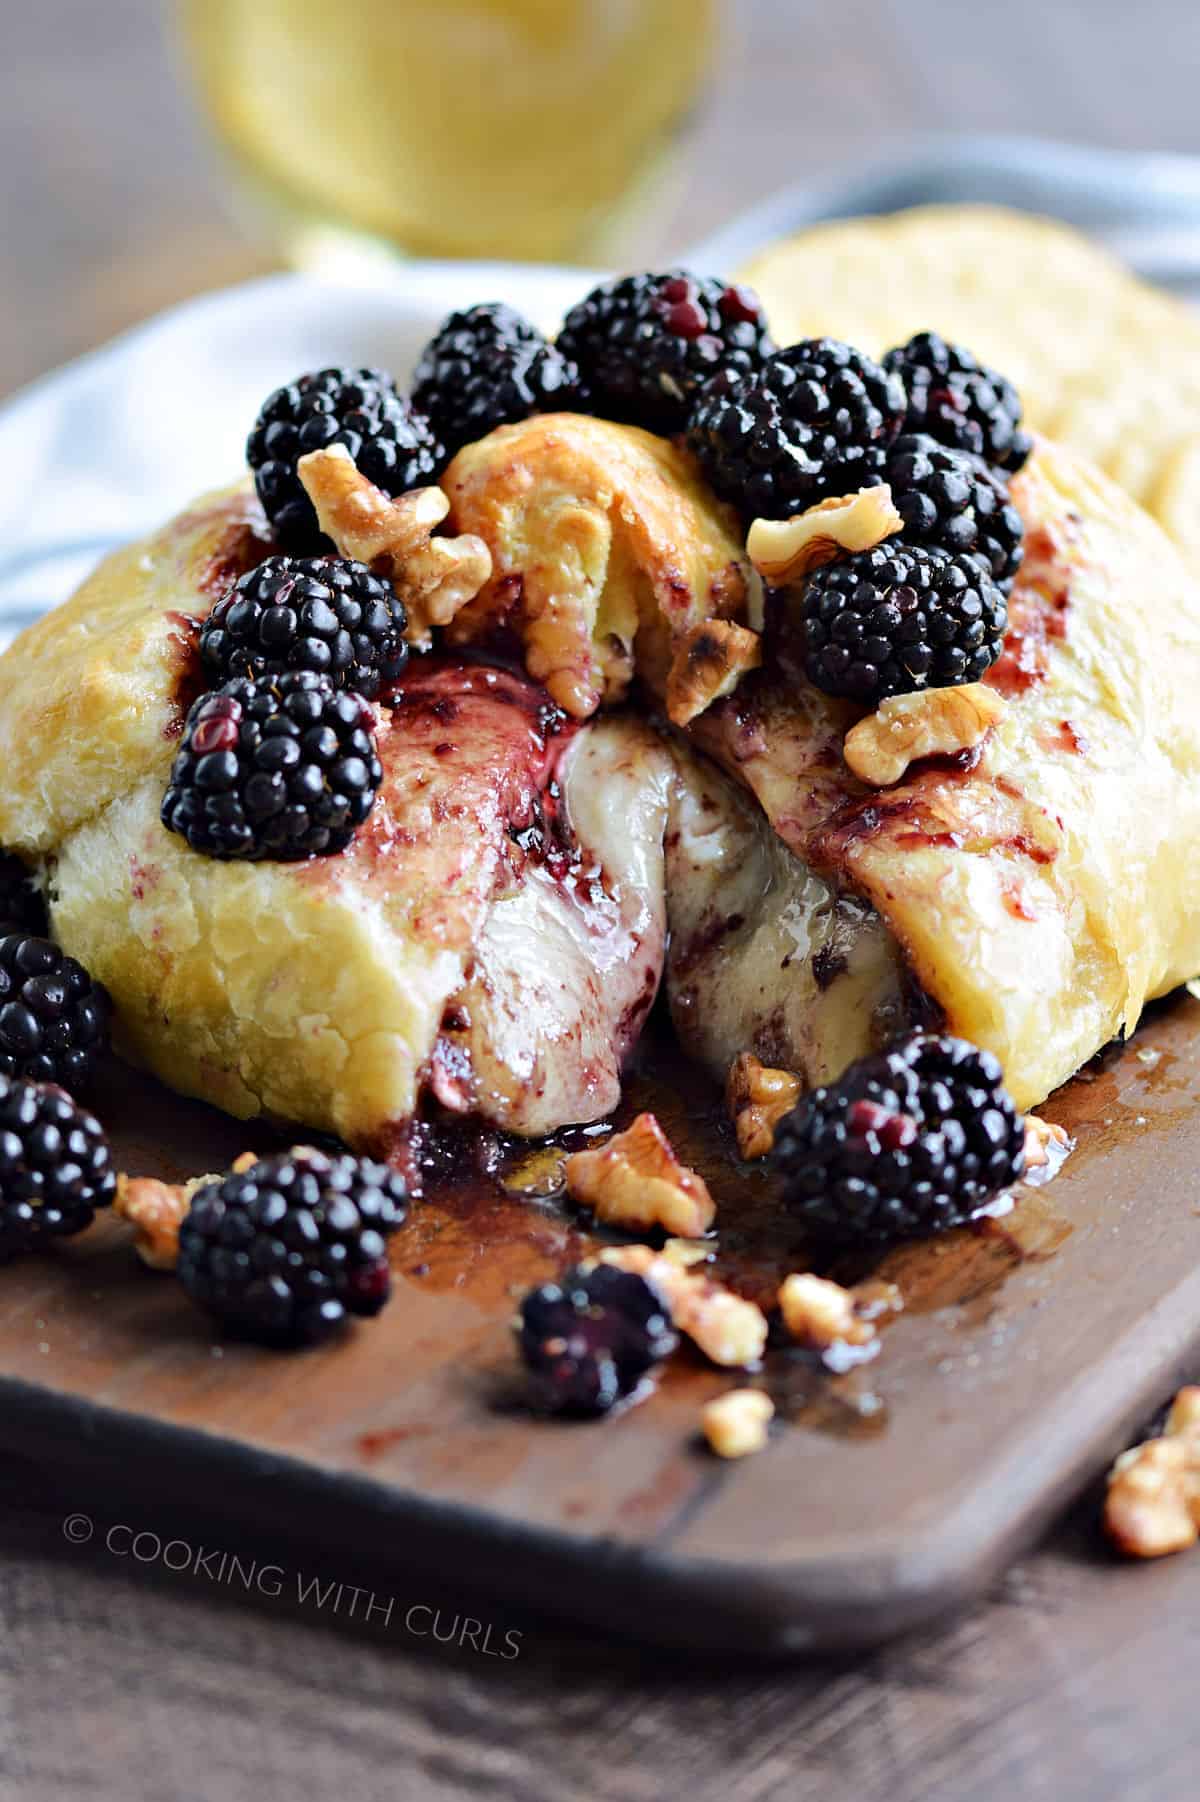 Melted cheese surrounded by puff pastry topped with blackberries and walnuts.